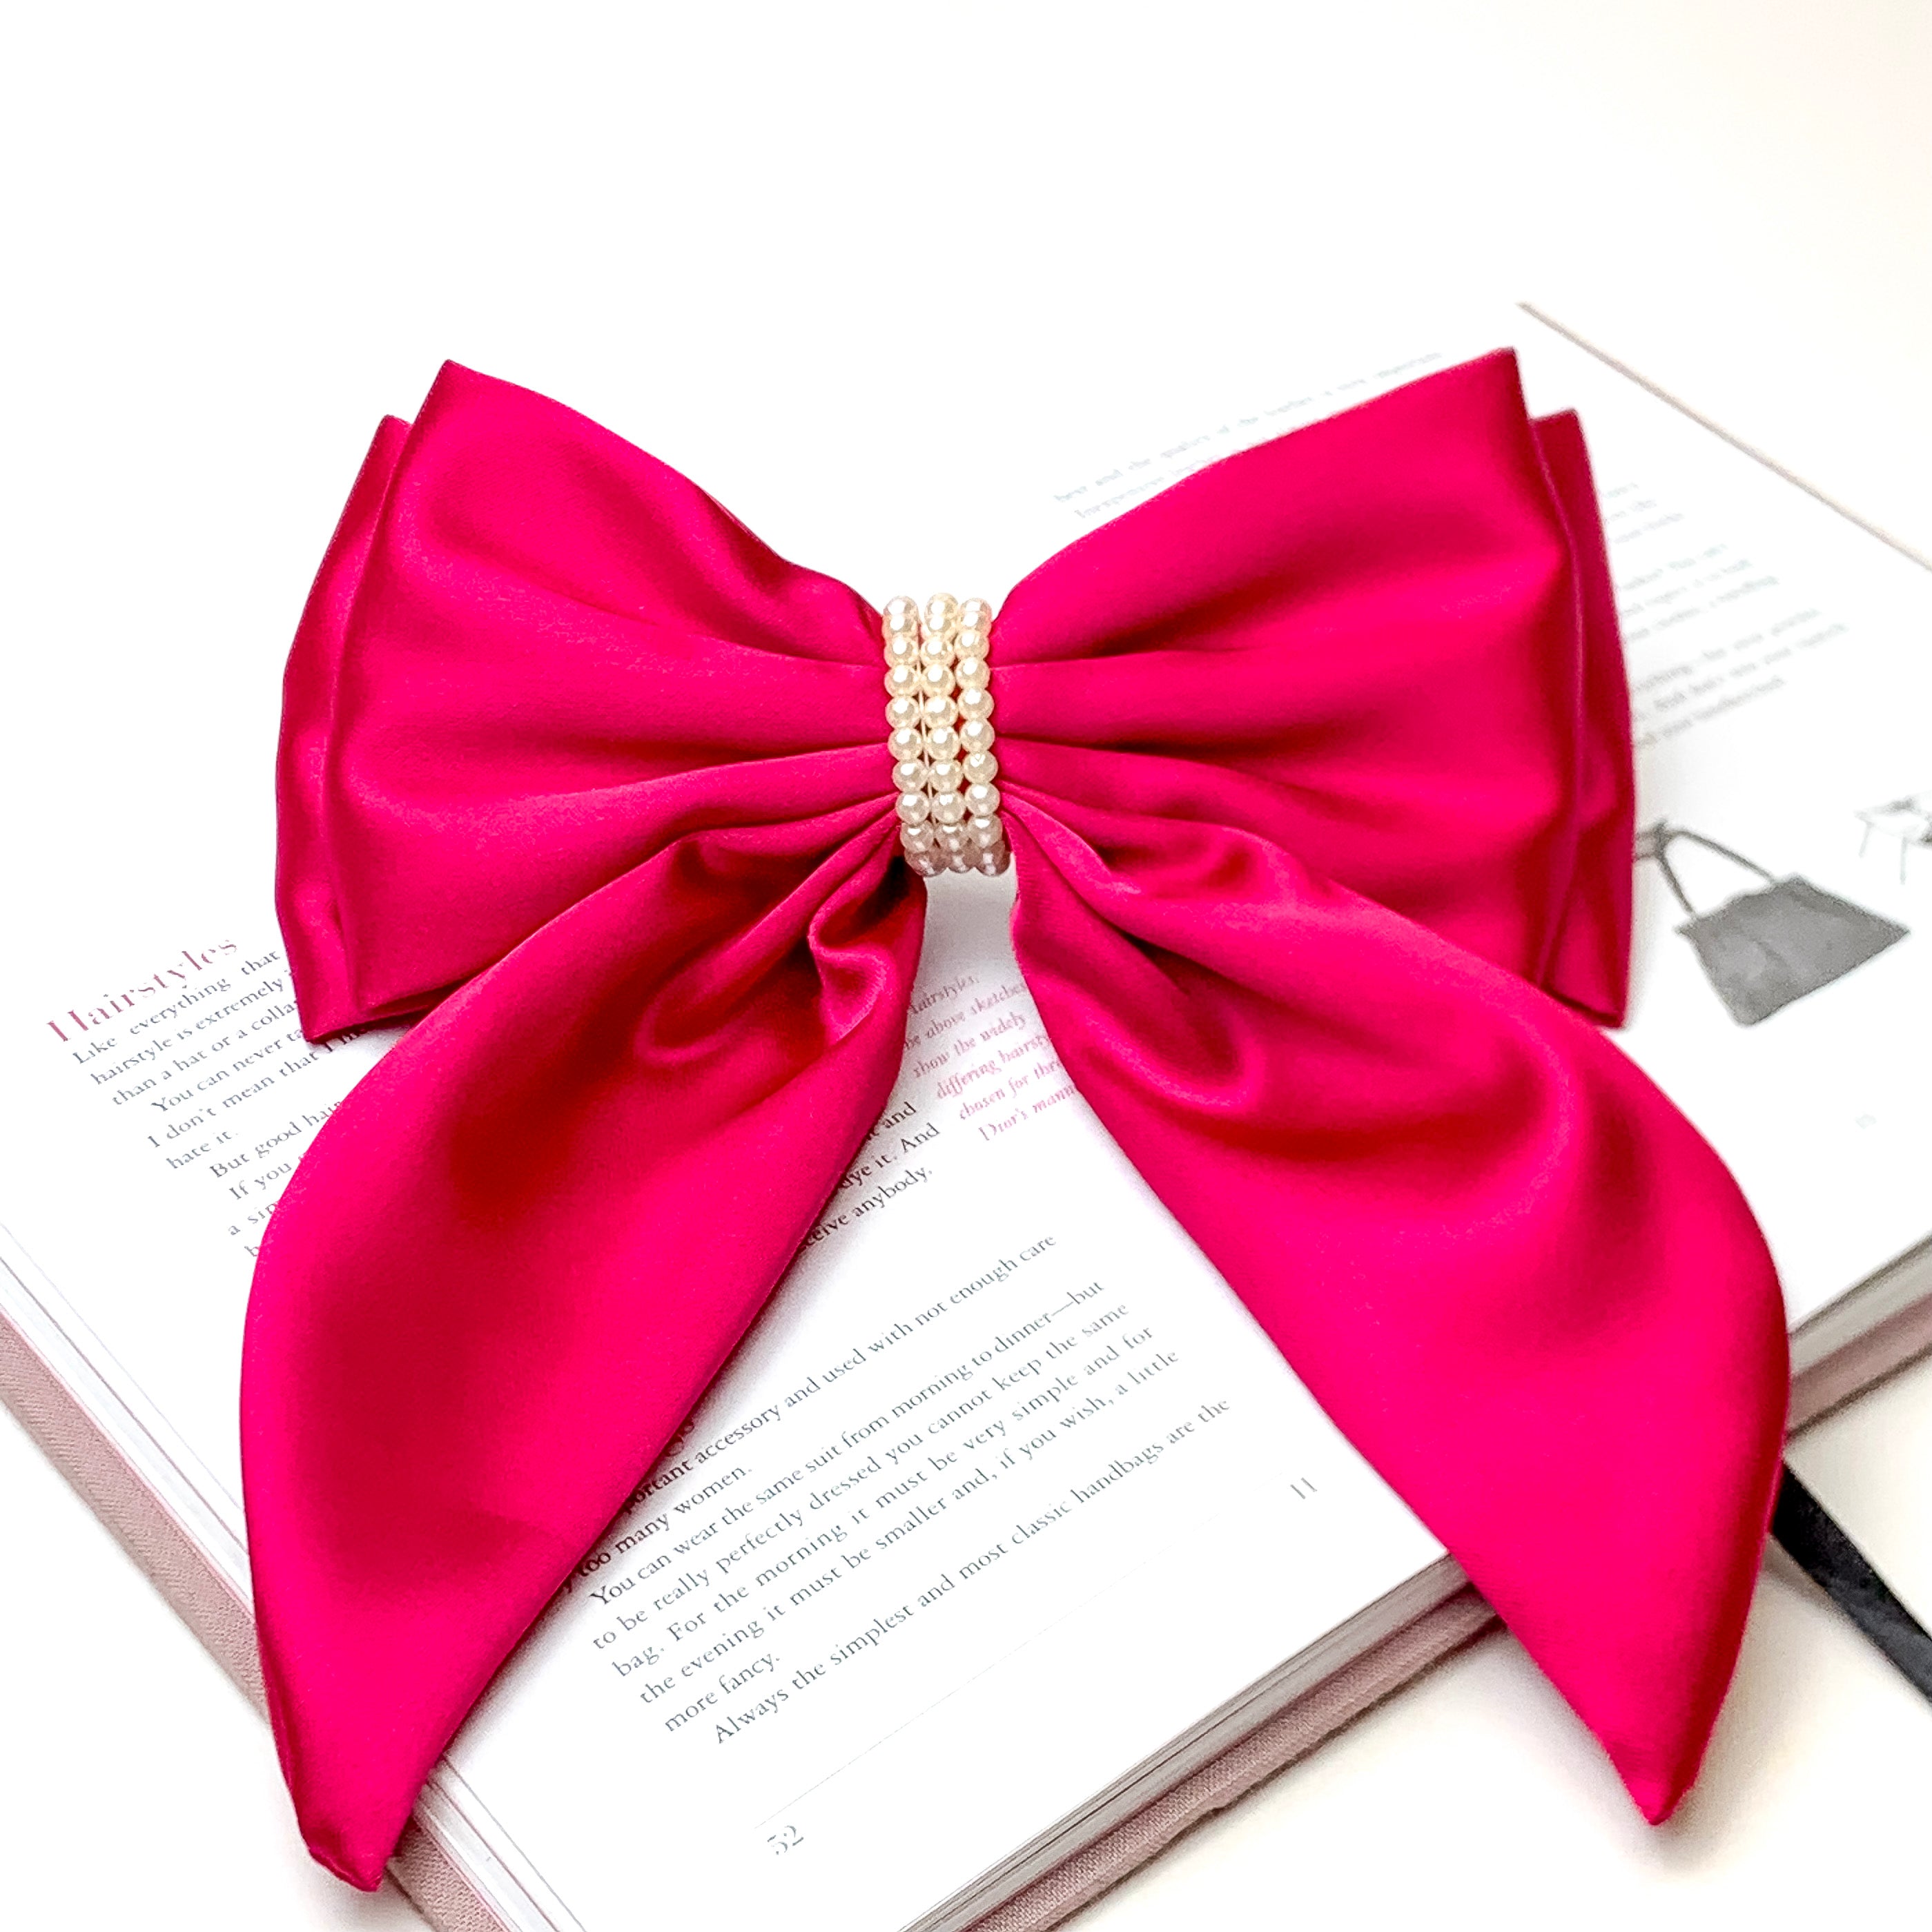 Miss Me Layered Bow with Pearl Center in Fuchsia Pink - Giddy Up Glamour Boutique